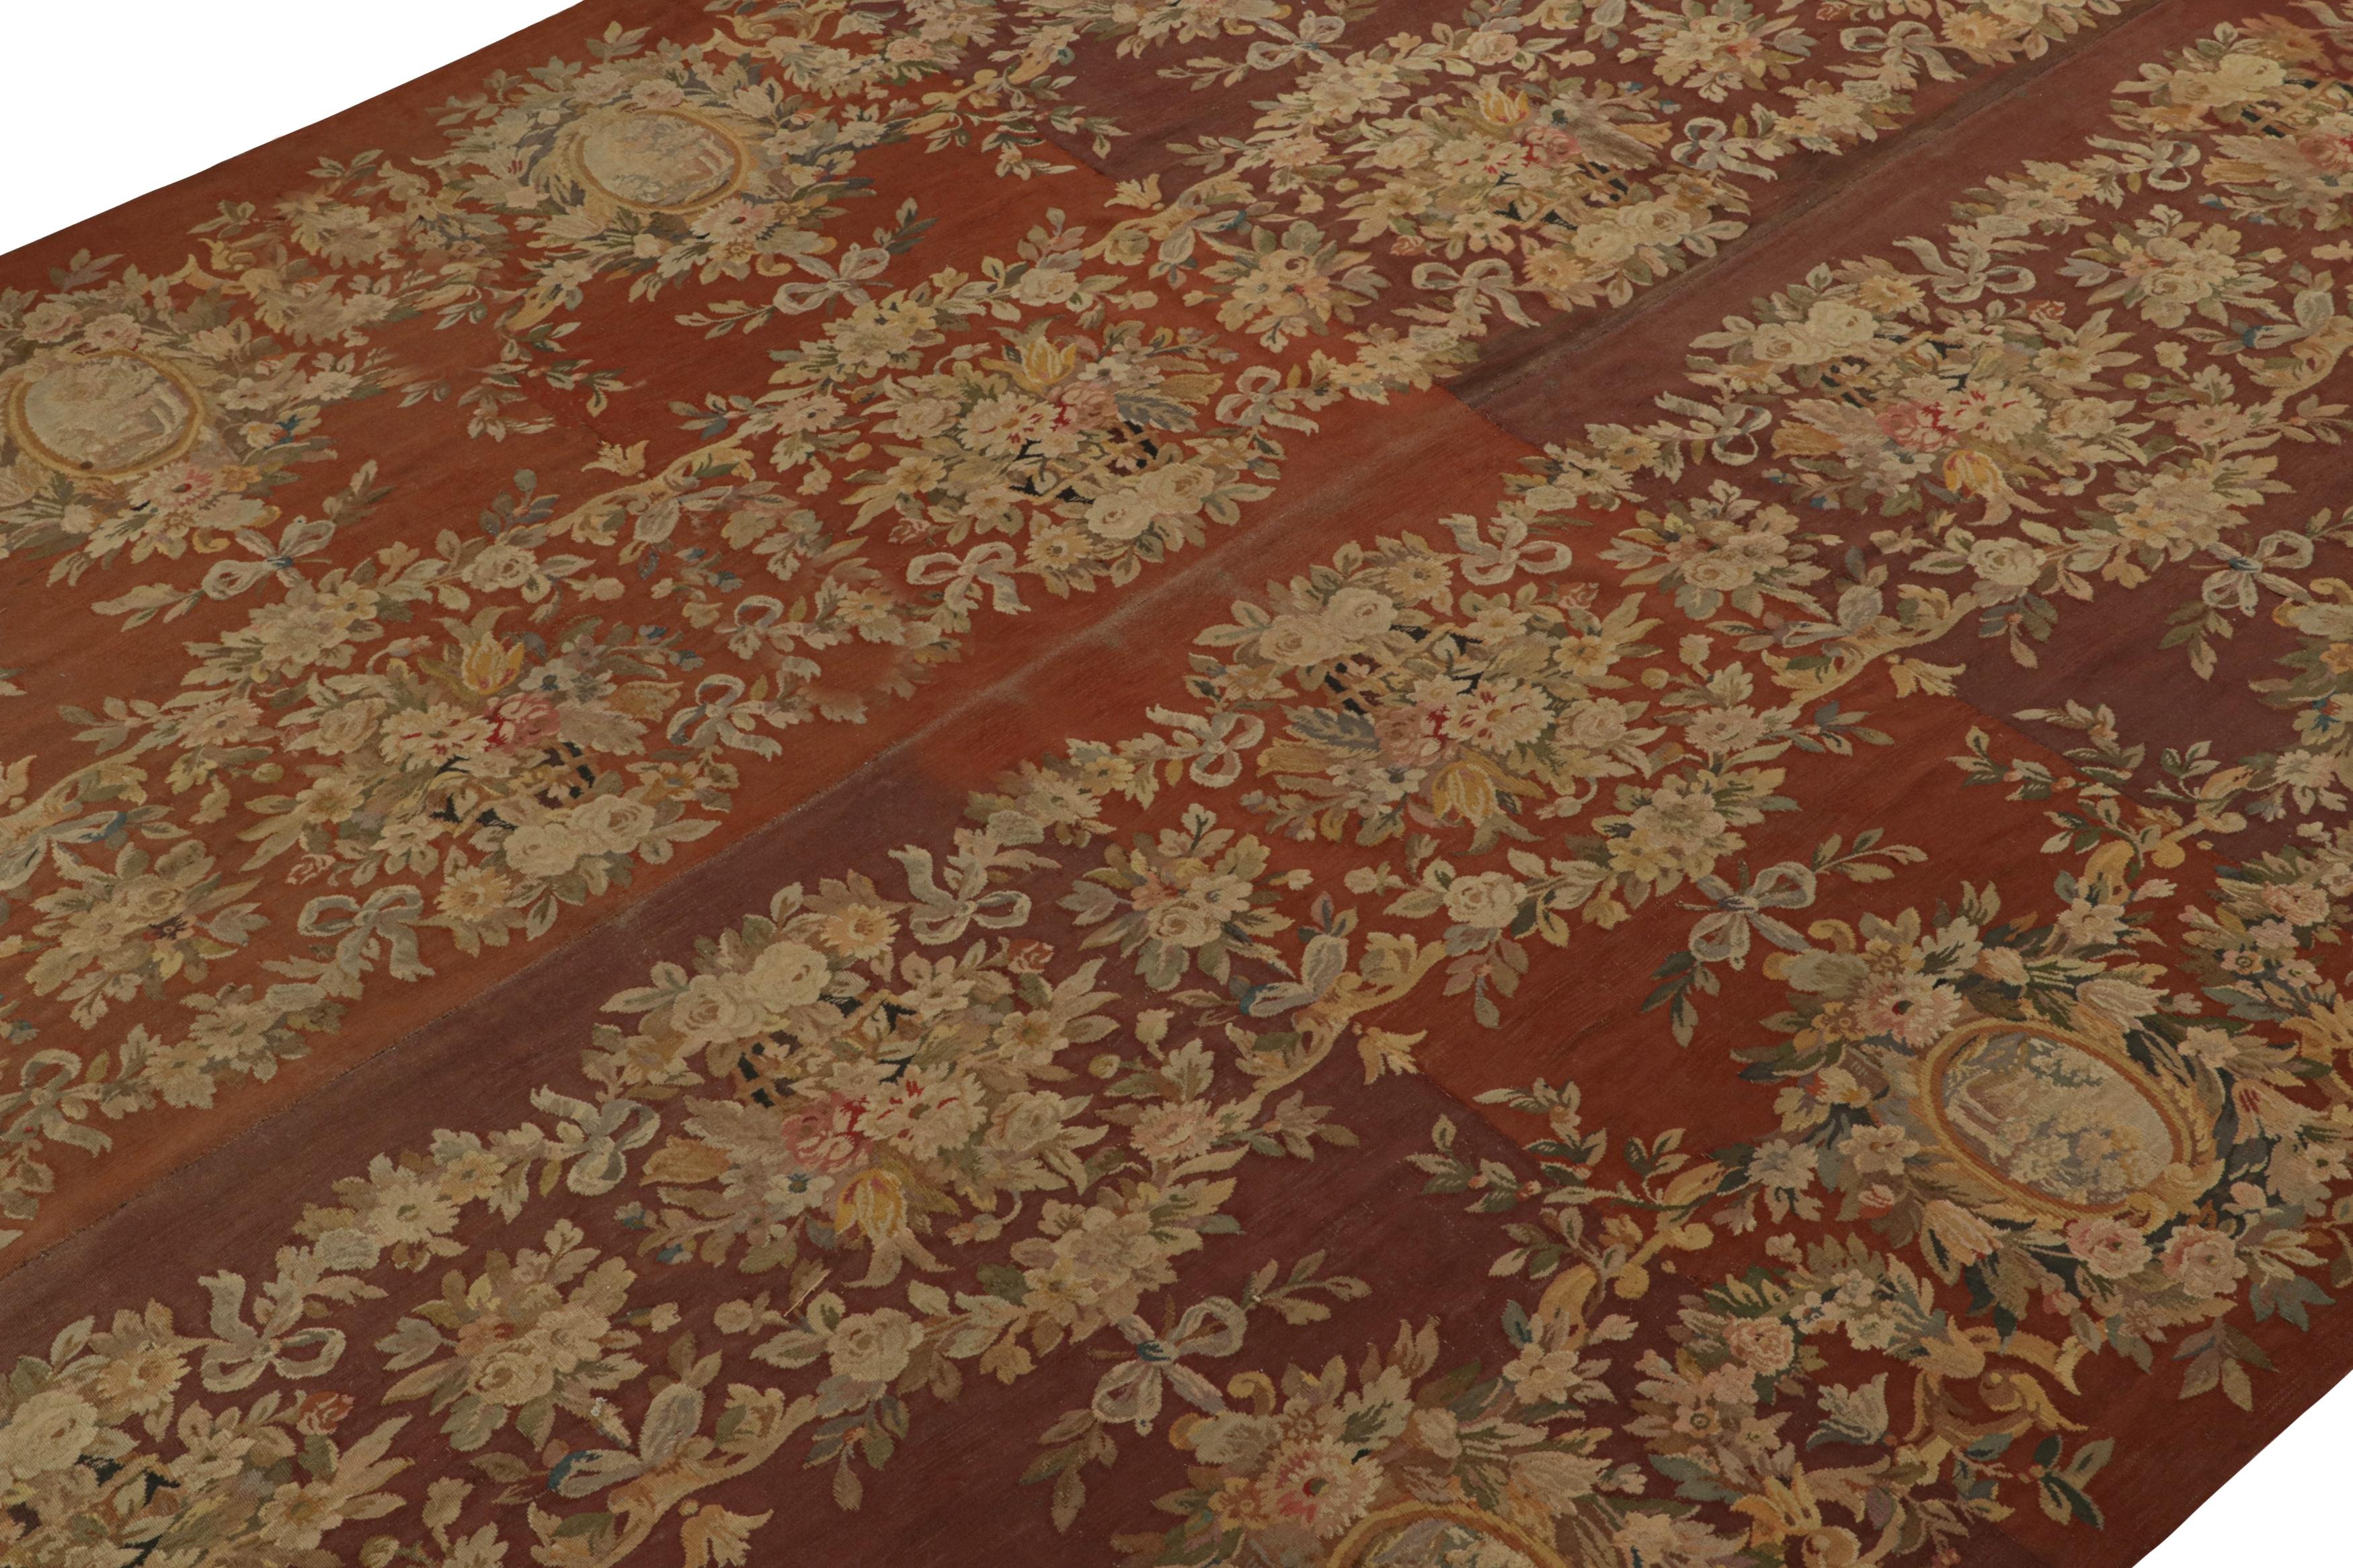 Hand-Woven Vintage Aubusson Flatweave Rug in Brown with Floral Patterns, from Rug & Kilim For Sale